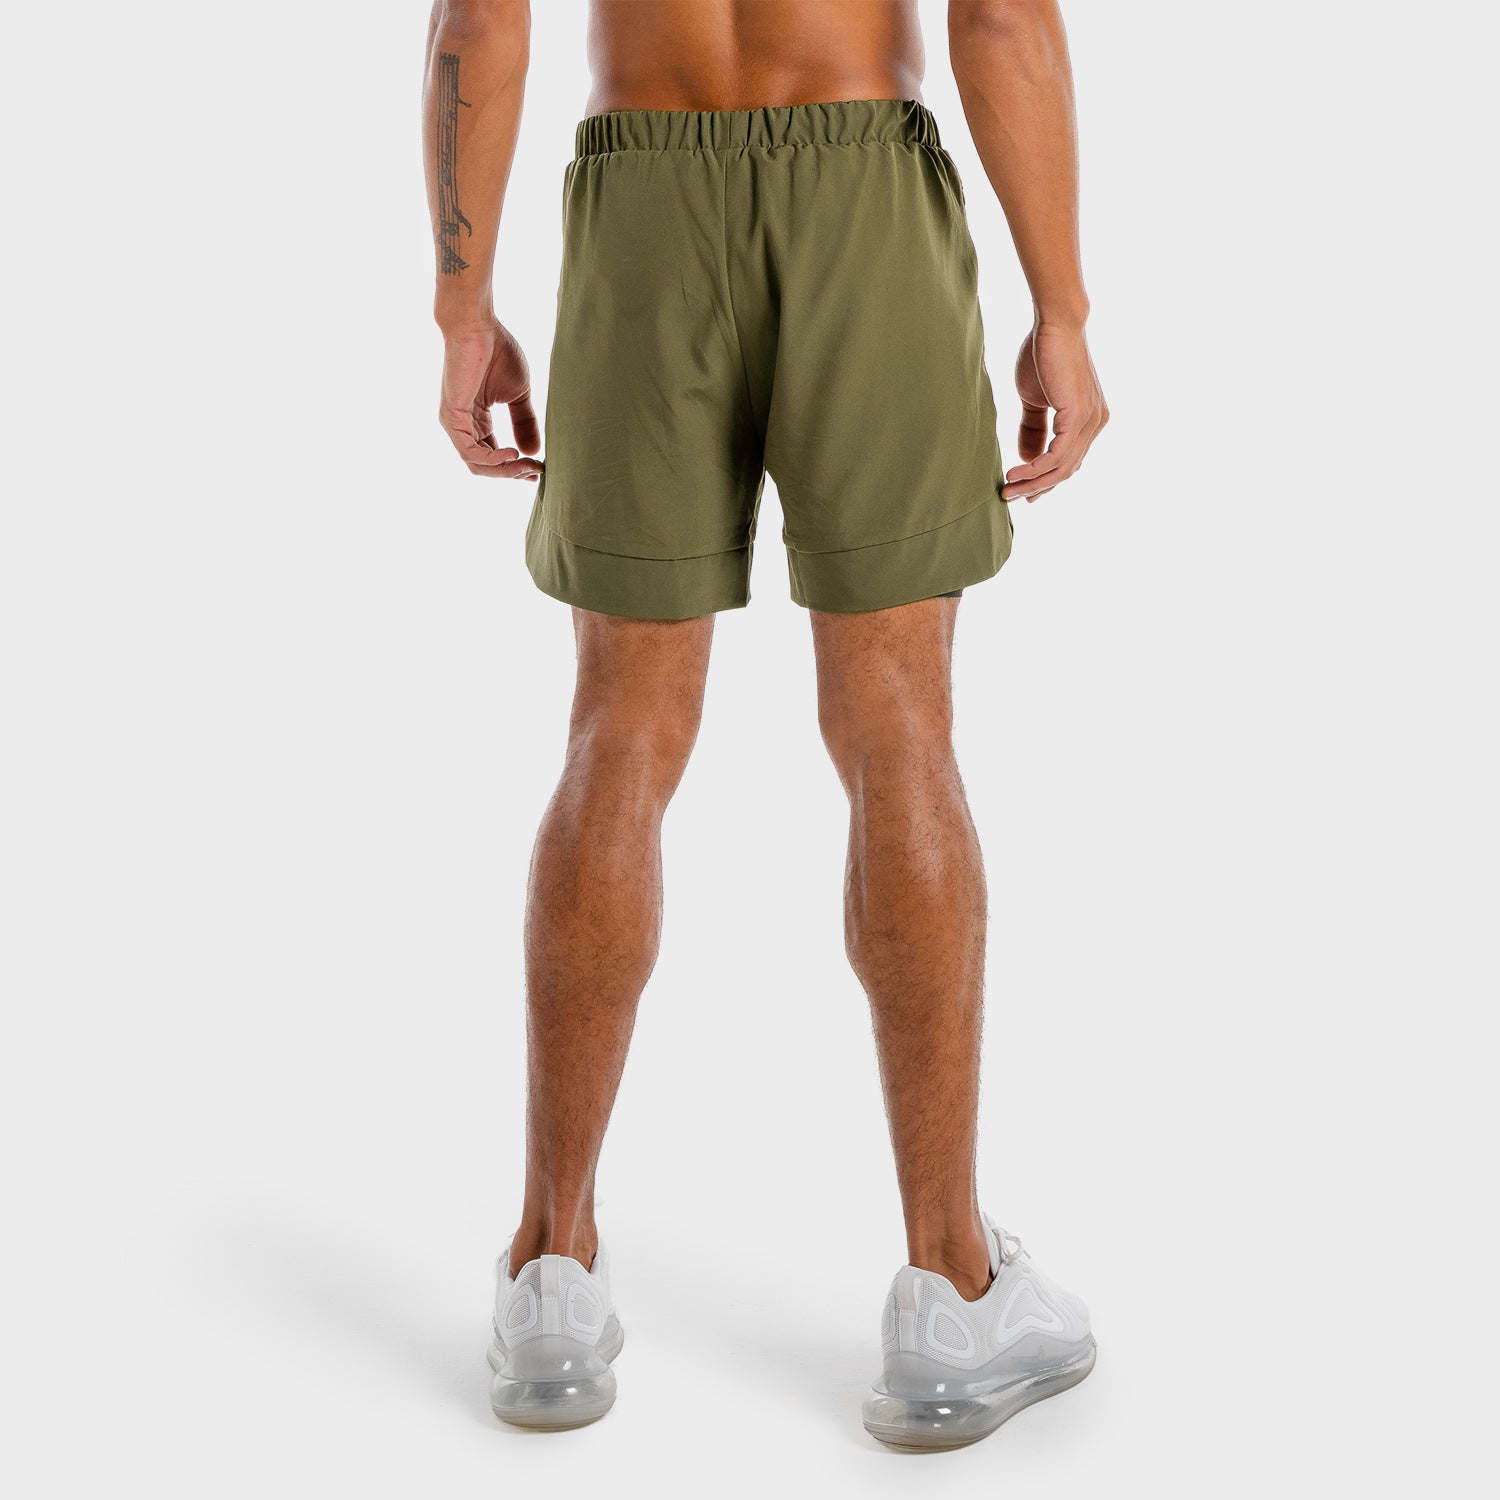 AE, Limitless 2-in-1 Shorts - Khaki And Black